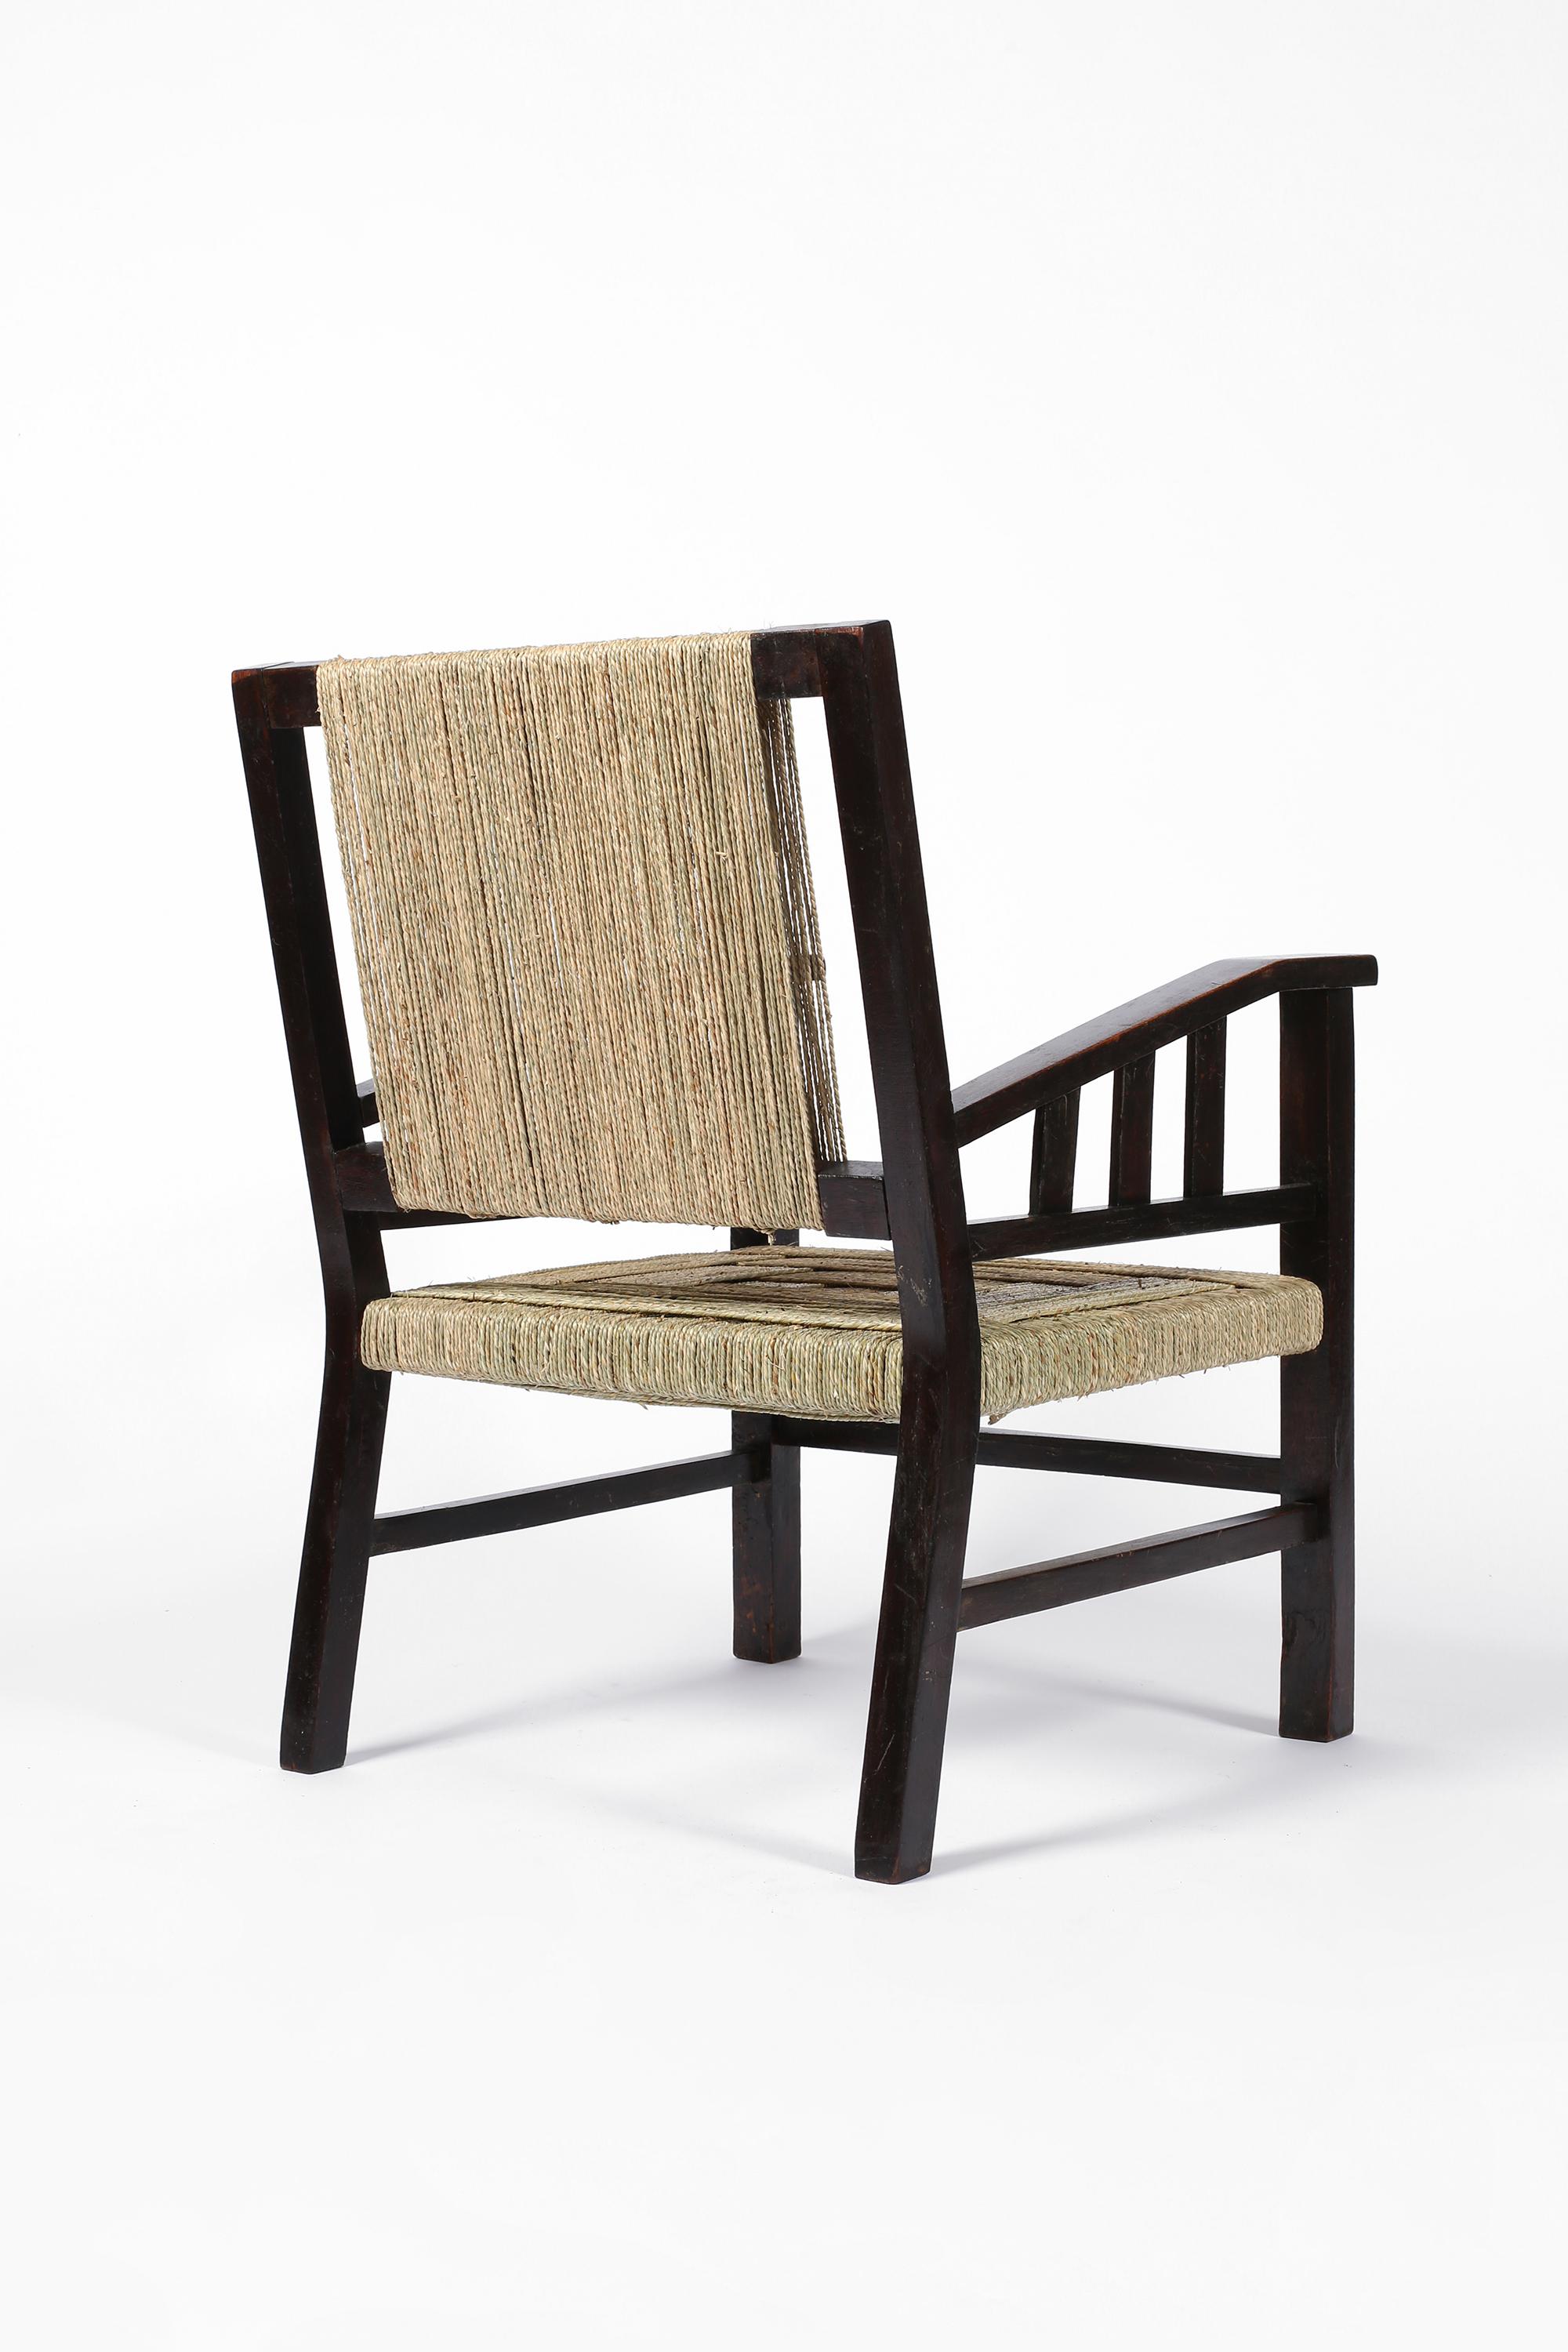 20th Century 1930s French Modernist Art Deco Armchair by Francis Jourdain in Beech and Rope For Sale